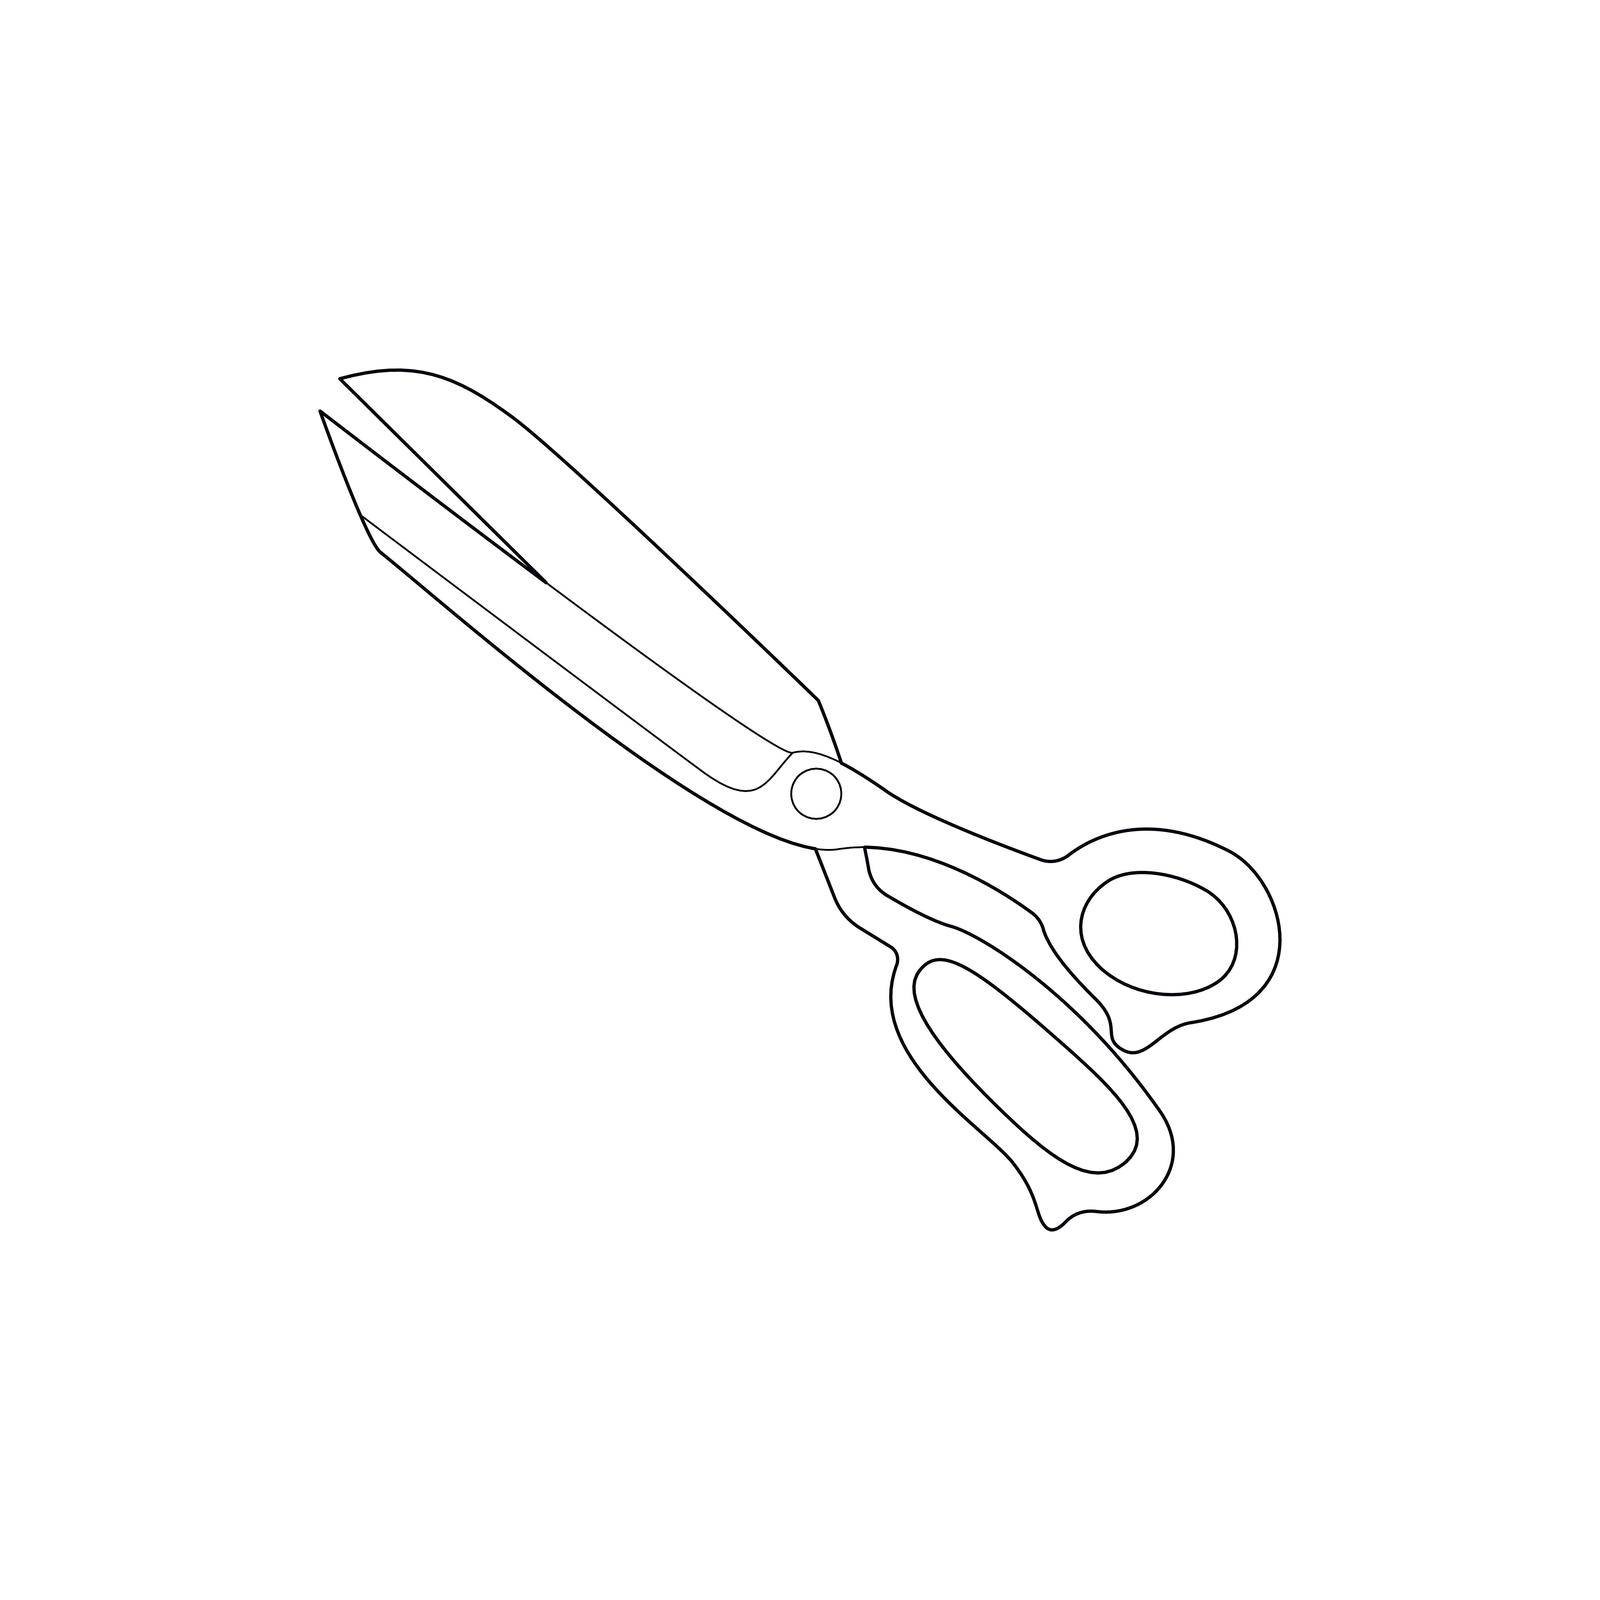 Scissors icon in outline style isolated on white background. Working tool symbol